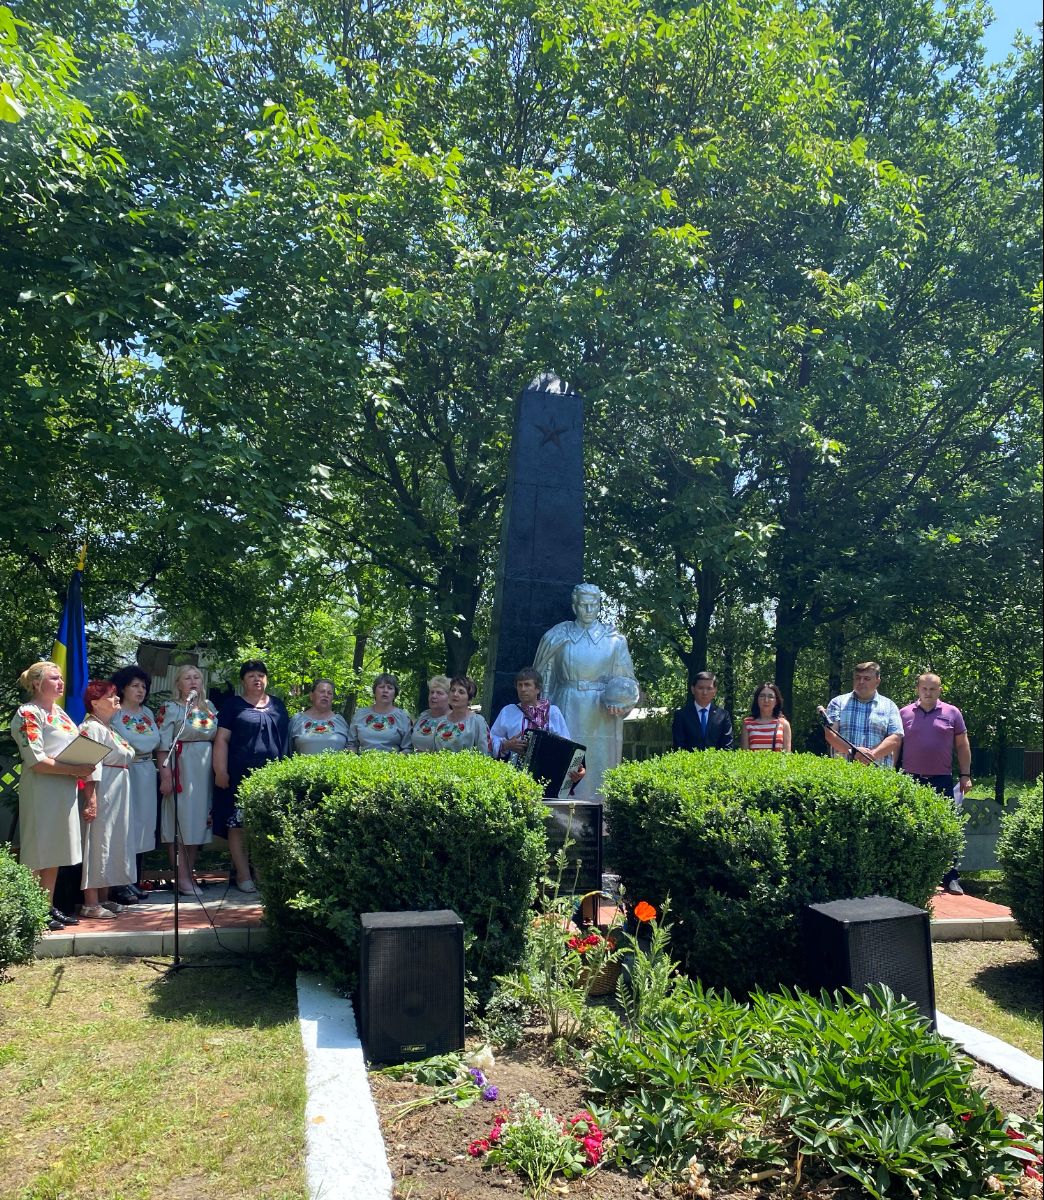 On 22nd of June, 2021, as part of the continuation of work to perpetuate the memory of the Kyrgyz soldiers who died during the Great Patriotic War on the territory of Ukraine, the Embassy took part in an event organized in the village of Dashukovka, Cherkasy region, where it honored the memory of Umetbek Asylbekov.